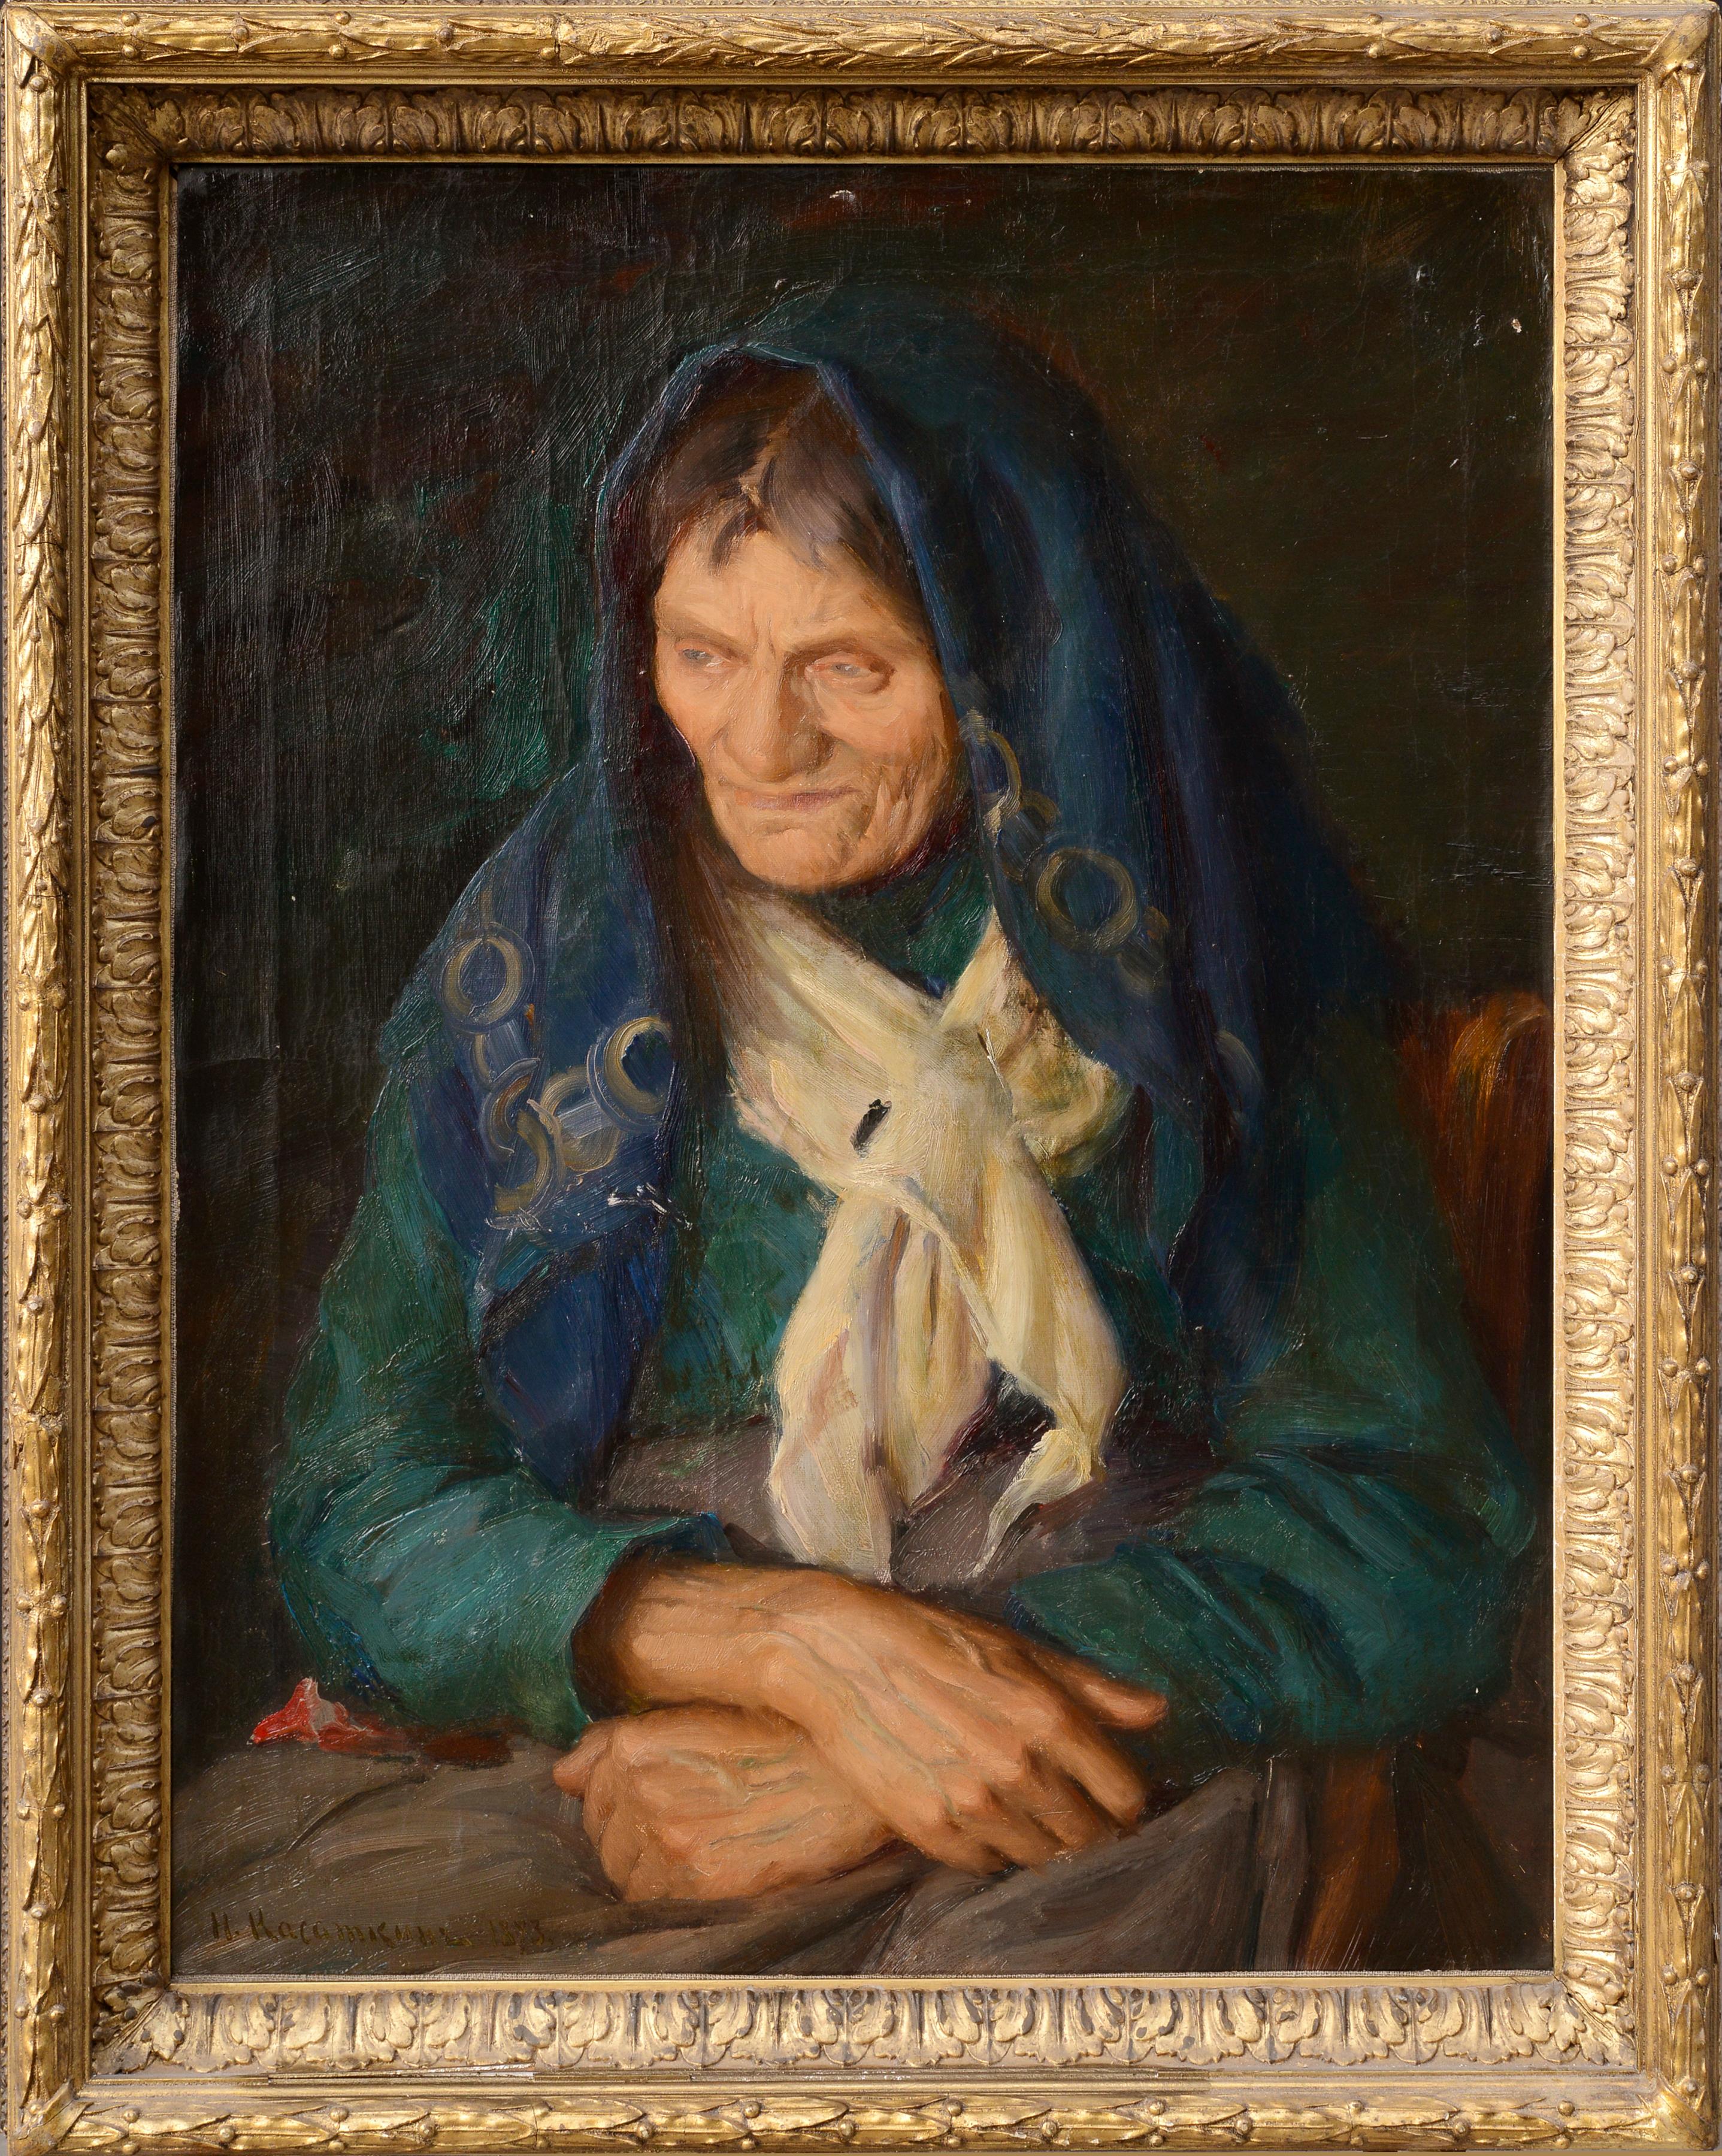 Nikolay Alekseyevich Kasatkin Portrait Painting - Portrait of Old Woman 1893 by Famous Russian Master Oil Painting on Canvas Frame